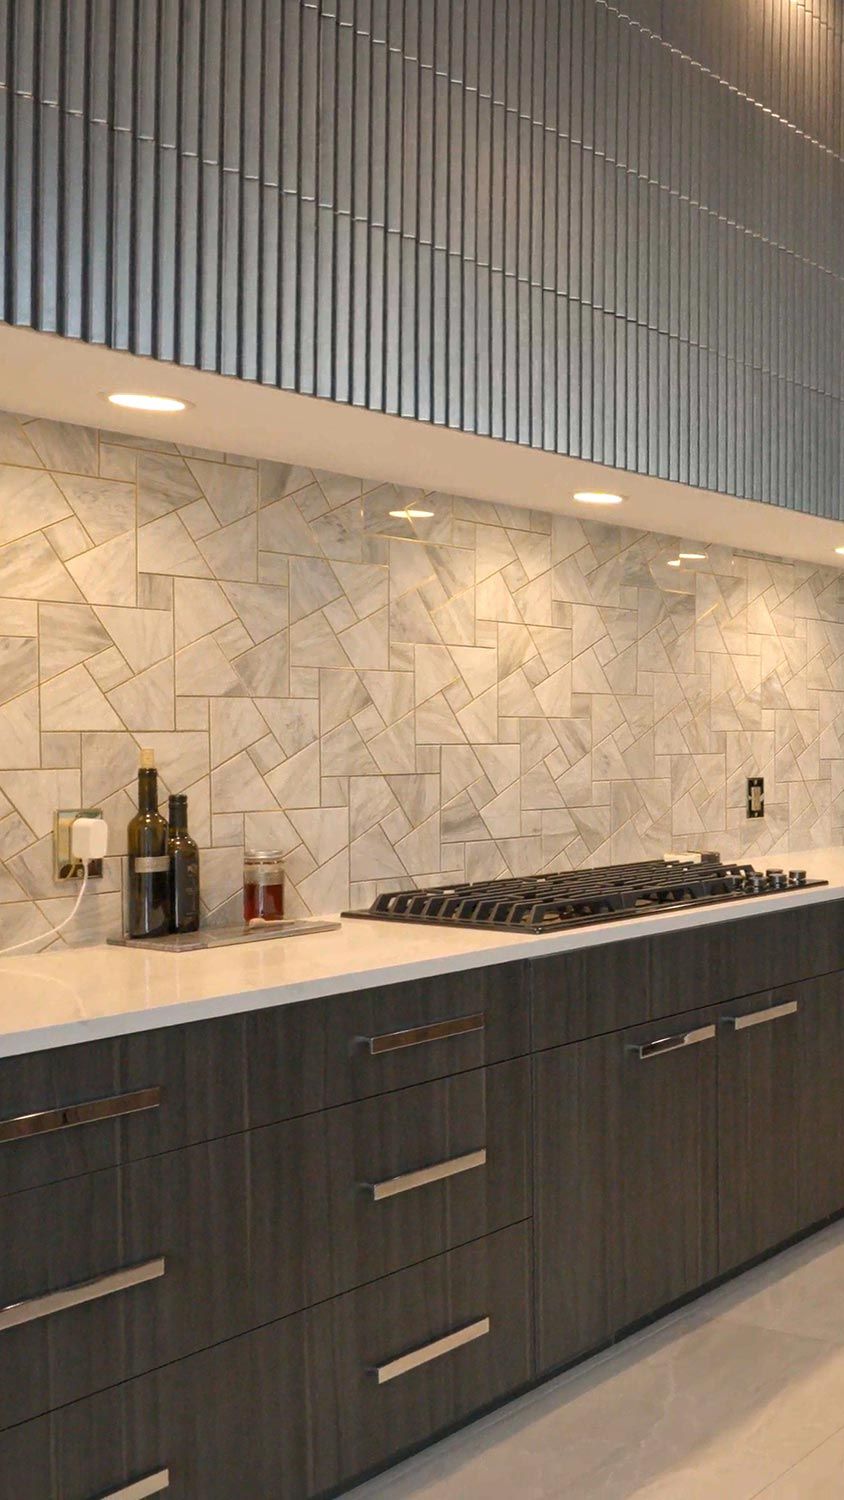 A modern kitchen with dark wood cabinets, a light-colored marble backsplash, and integrated lighting.